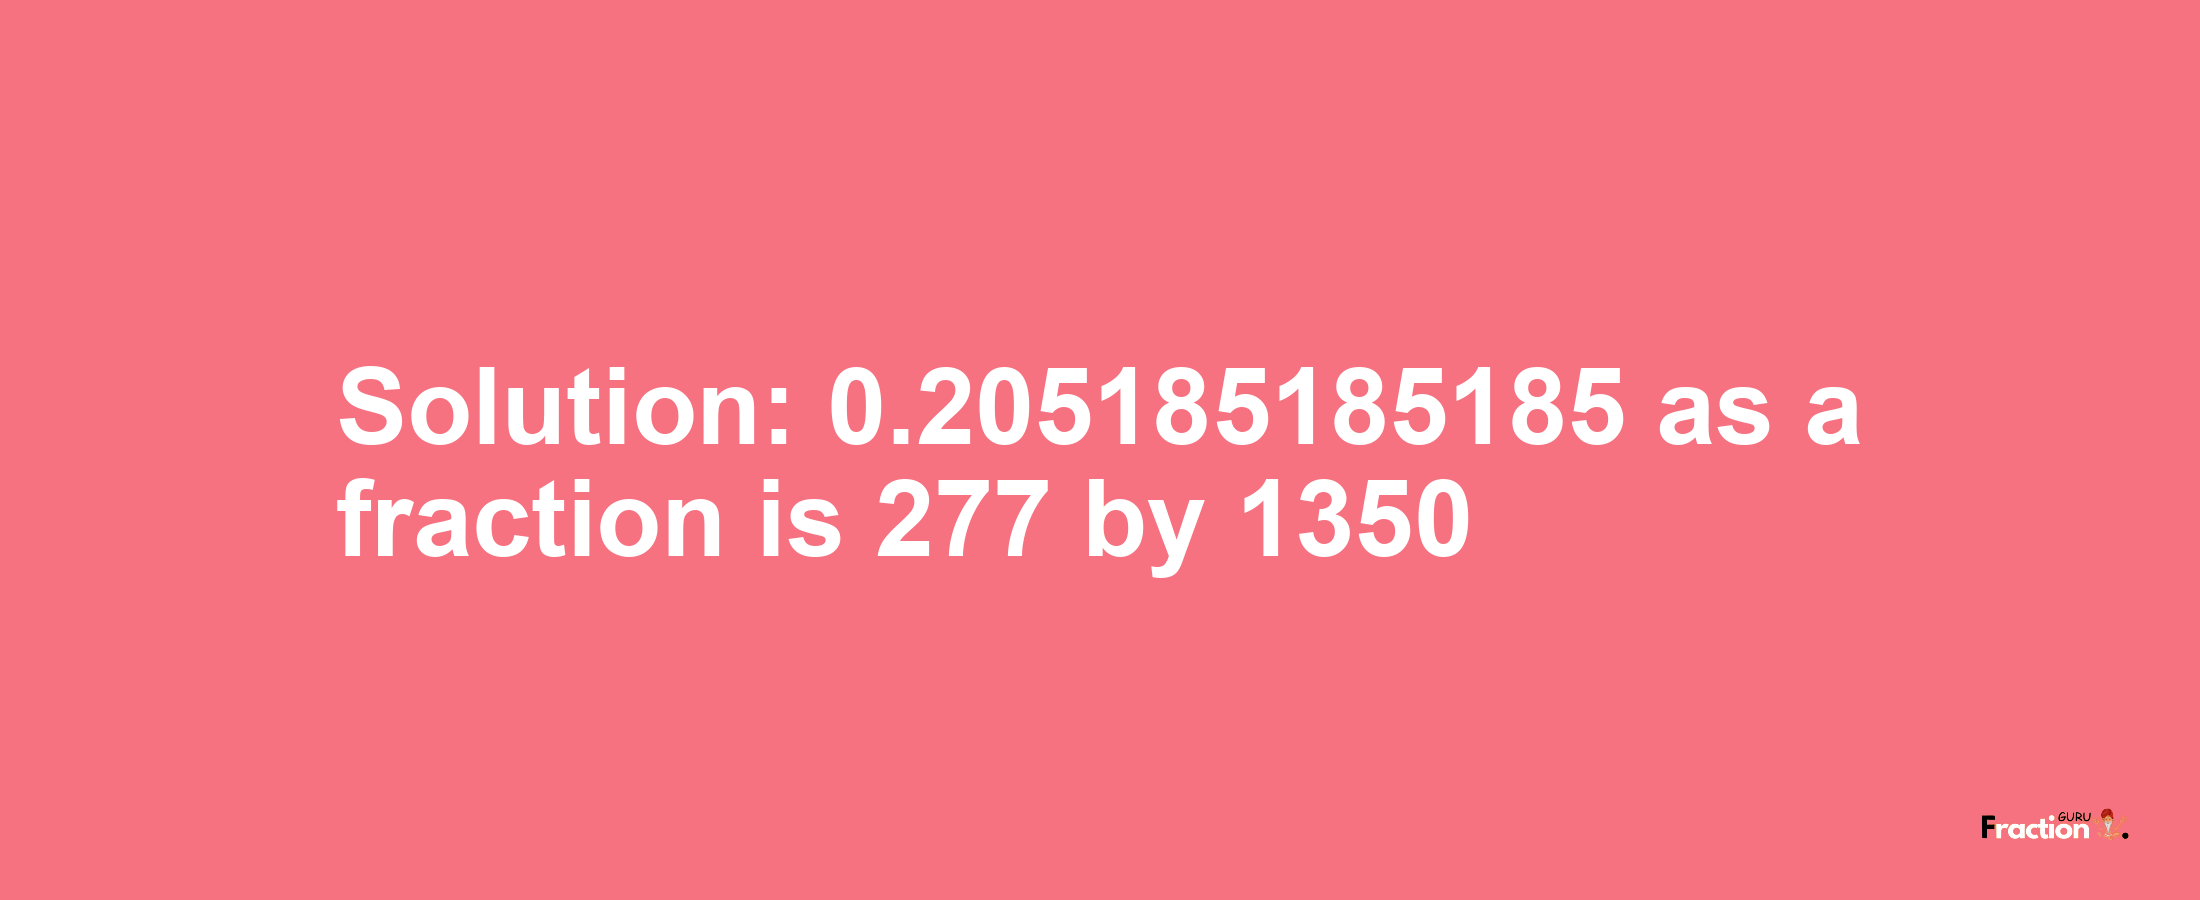 Solution:0.205185185185 as a fraction is 277/1350